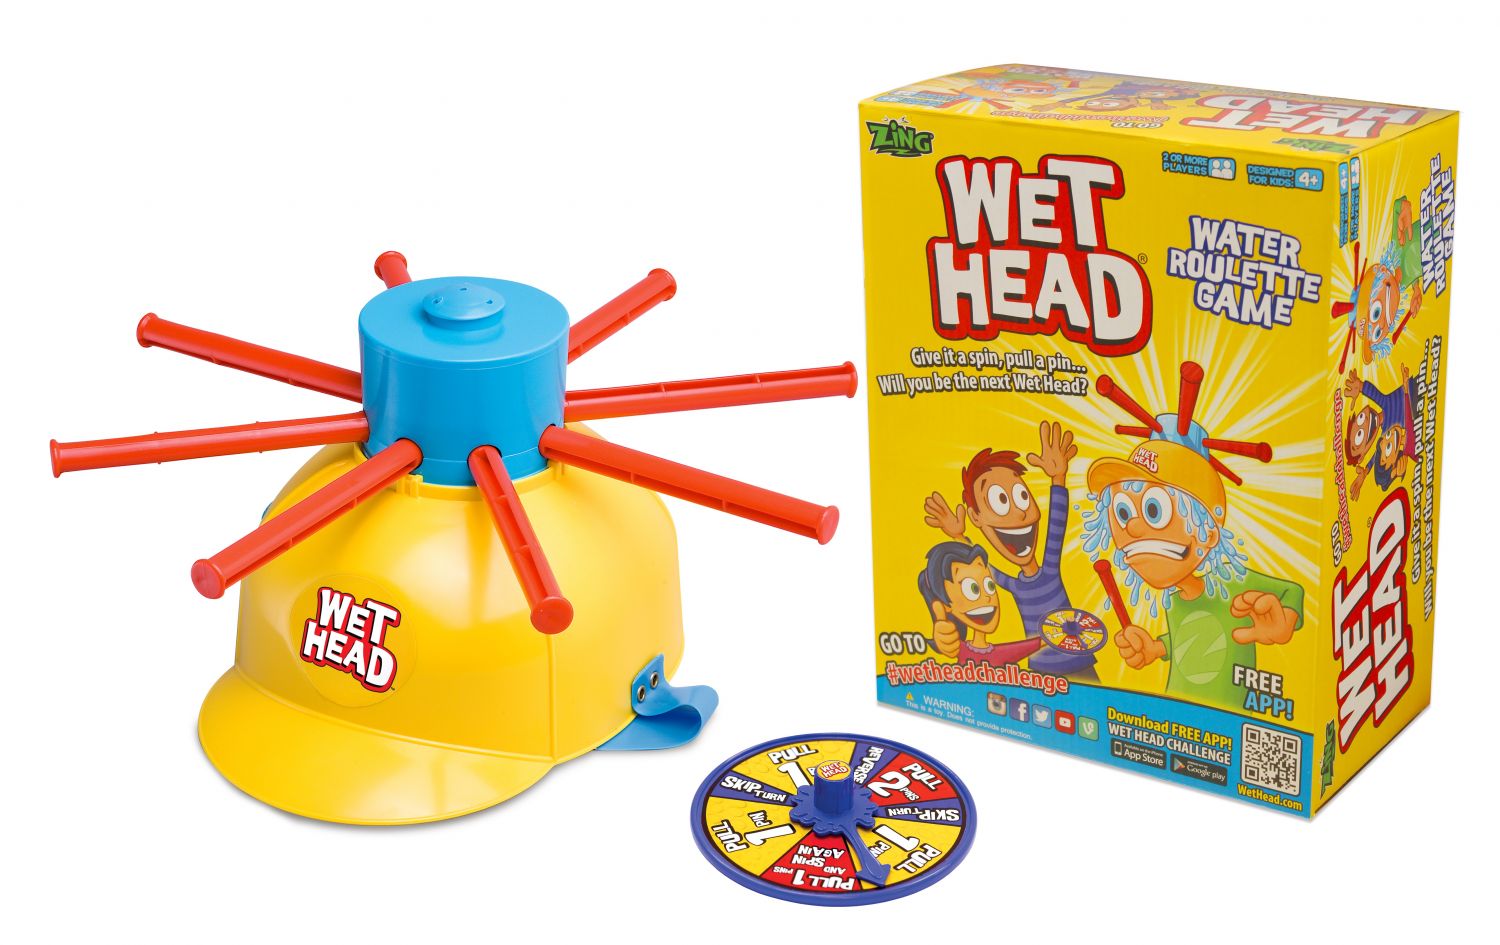 Wet Head Game - Toy Reviews - The Toy Insider.